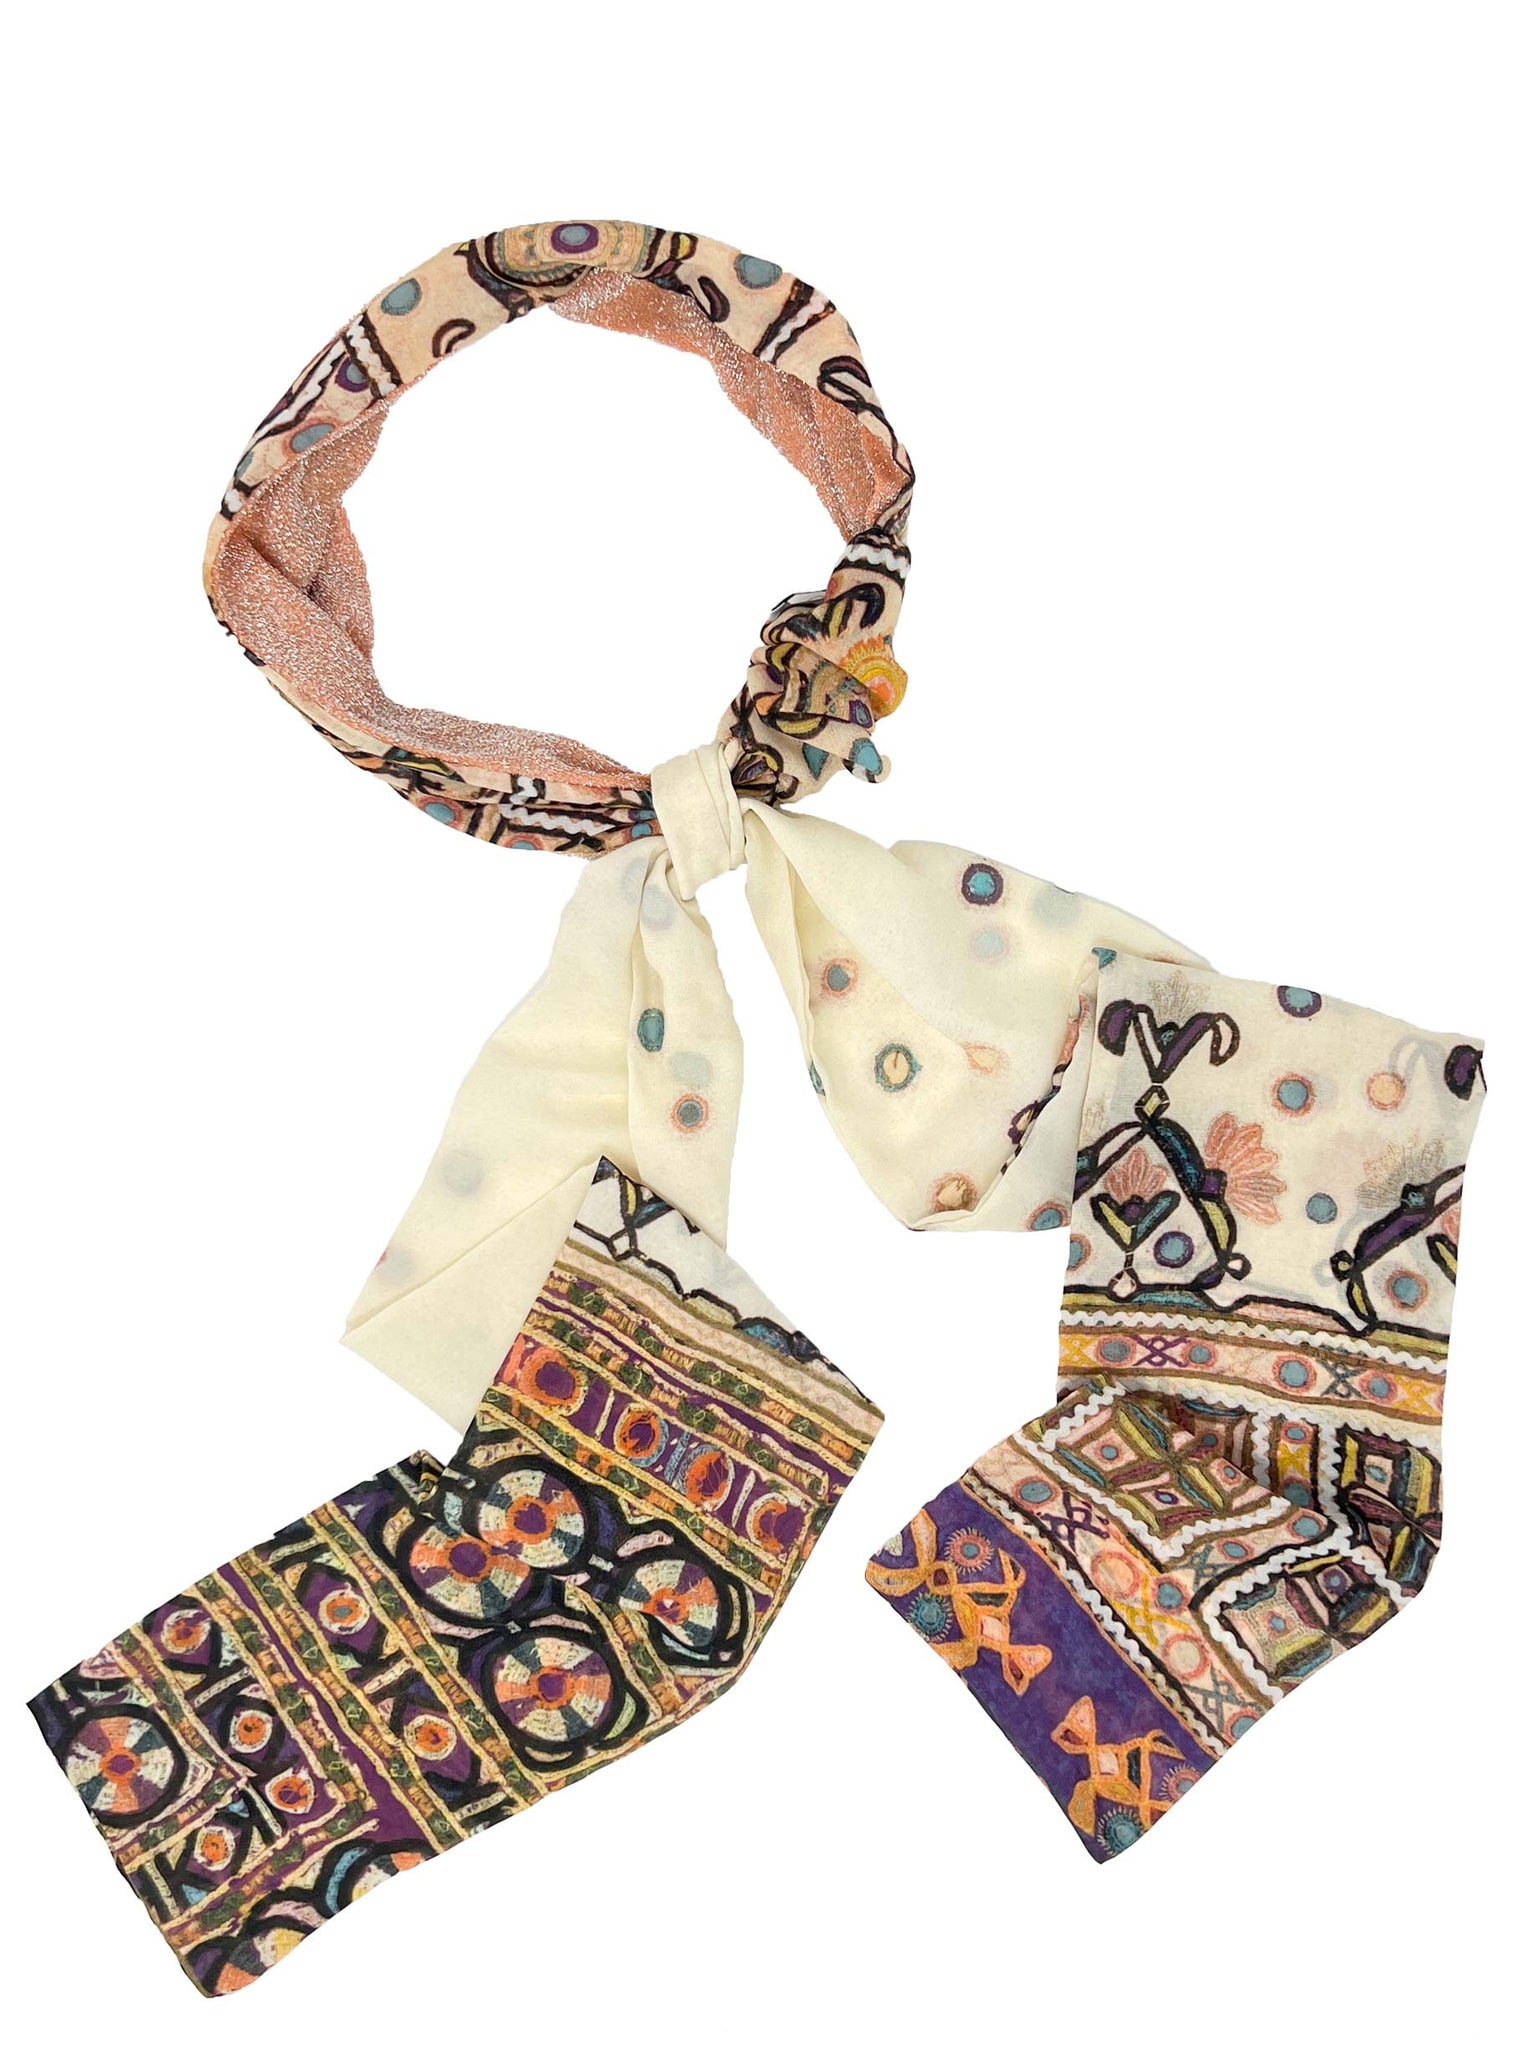 "Lucia" headband in ethnic patterned voile and peach lurex